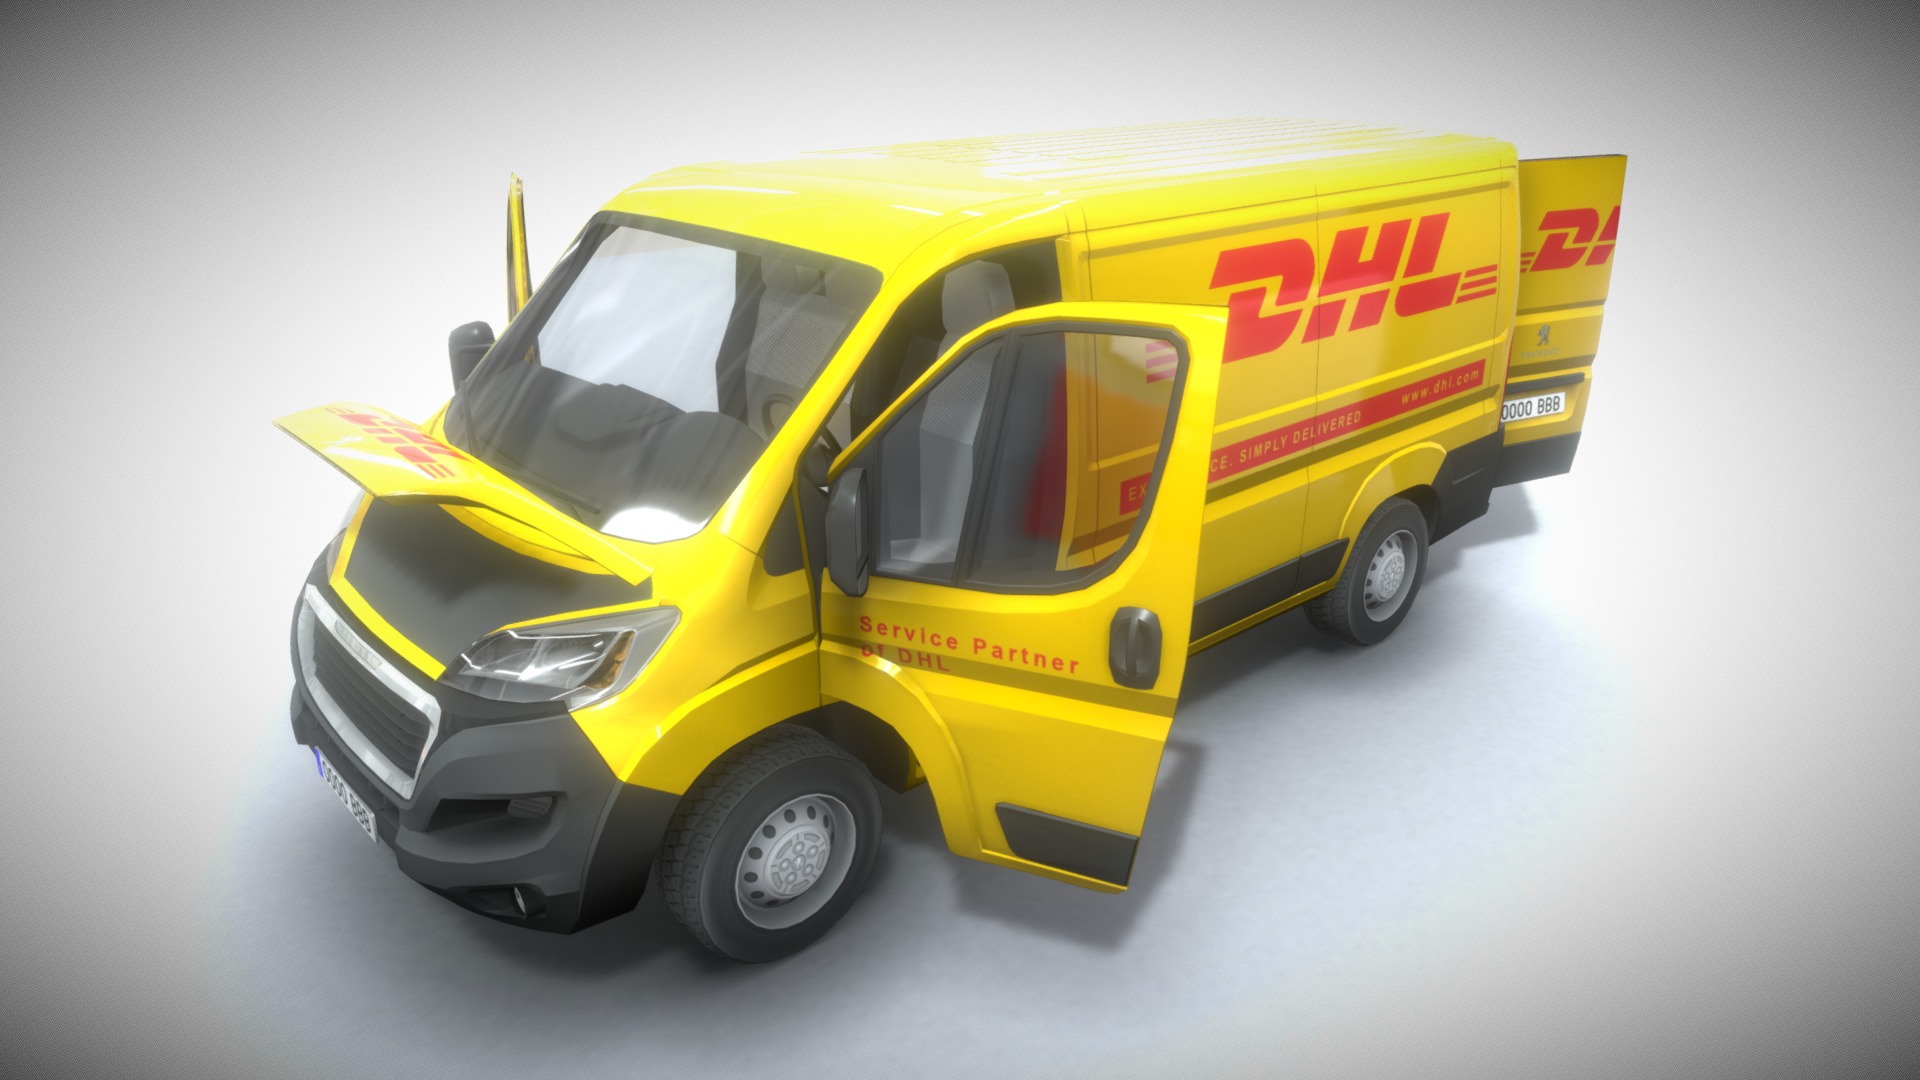 3D model Peugeot Boxer Dhl - This is a 3D model of the Peugeot Boxer Dhl. The 3D model is about a yellow truck with a red stripe.